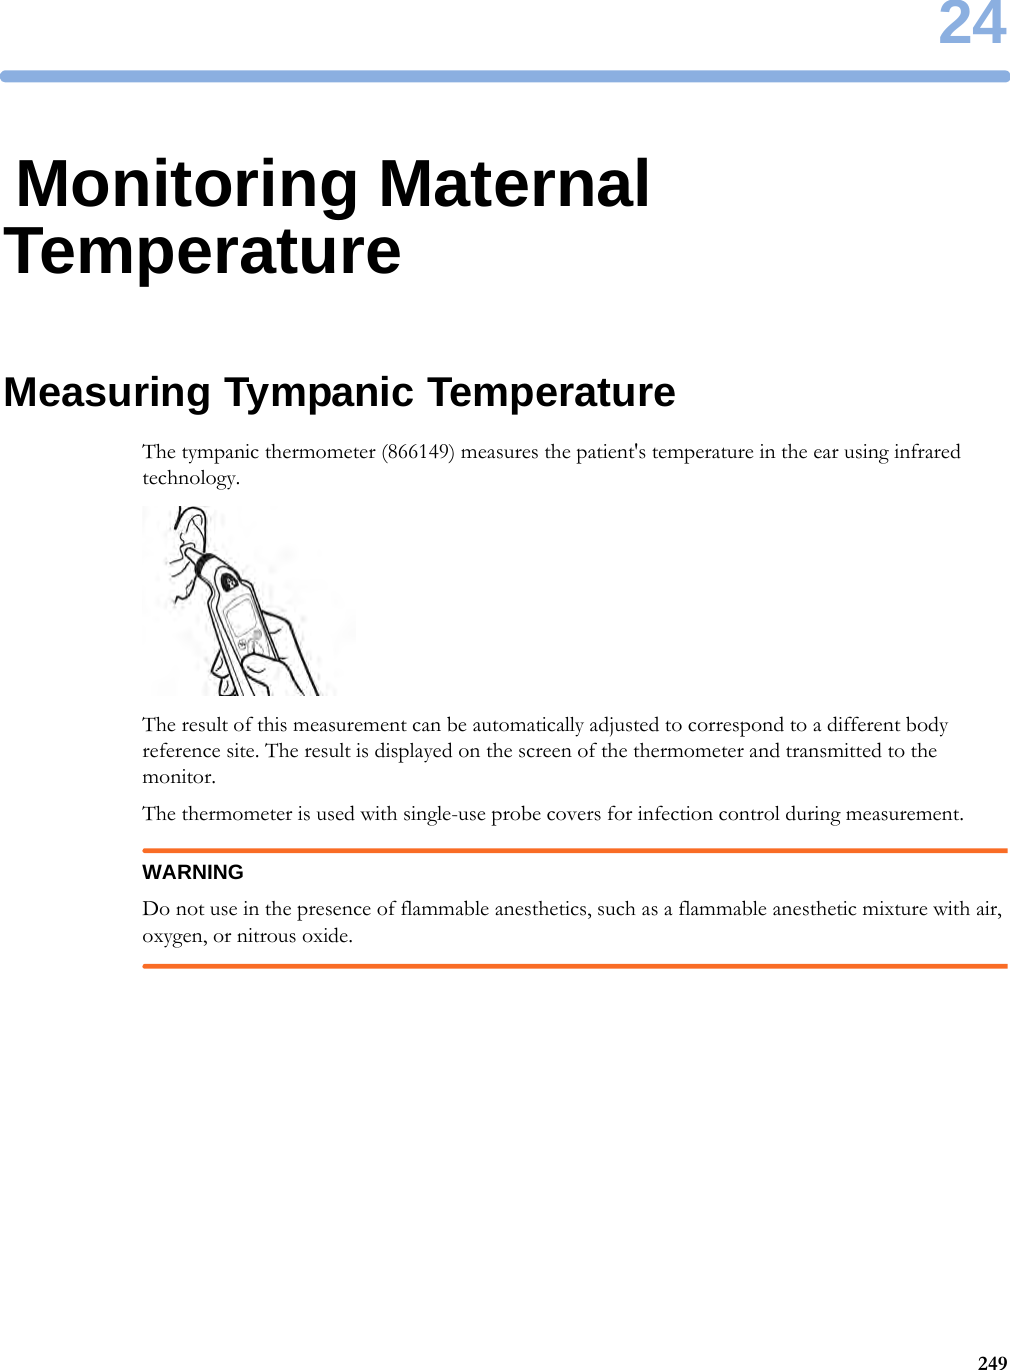 2424924Monitoring Maternal TemperatureMeasuring Tympanic TemperatureThe tympanic thermometer (866149) measures the patient&apos;s temperature in the ear using infrared technology.The result of this measurement can be automatically adjusted to correspond to a different body reference site. The result is displayed on the screen of the thermometer and transmitted to the monitor.The thermometer is used with single-use probe covers for infection control during measurement.WARNINGDo not use in the presence of flammable anesthetics, such as a flammable anesthetic mixture with air, oxygen, or nitrous oxide.